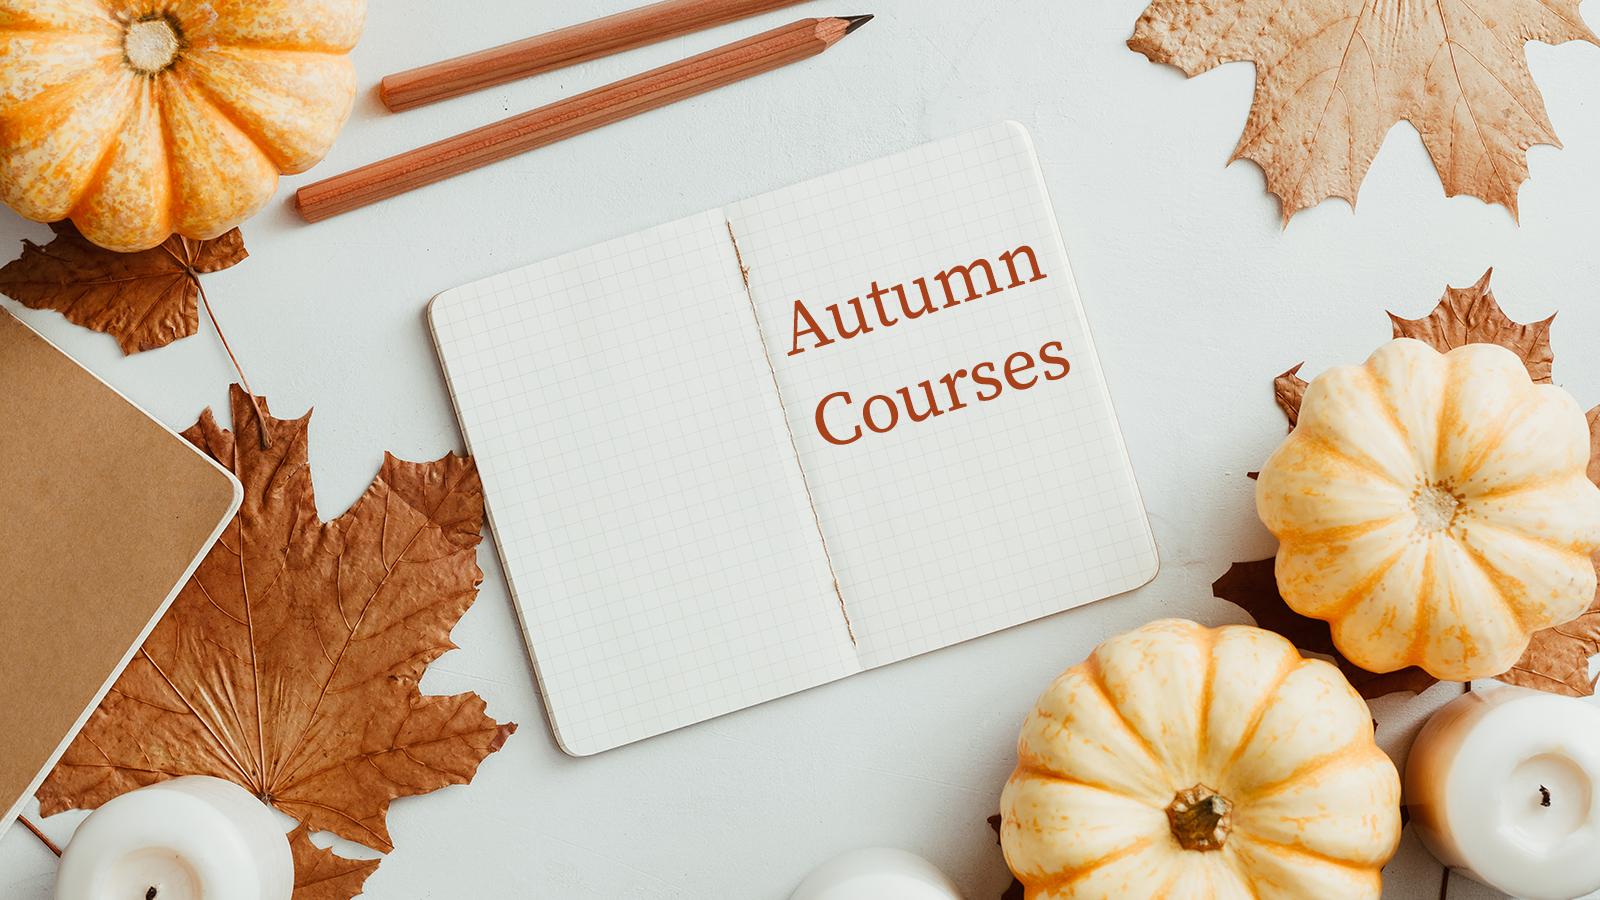 autumn courses written on a booklet with autumn leaves, pumpkins and pencils on the page